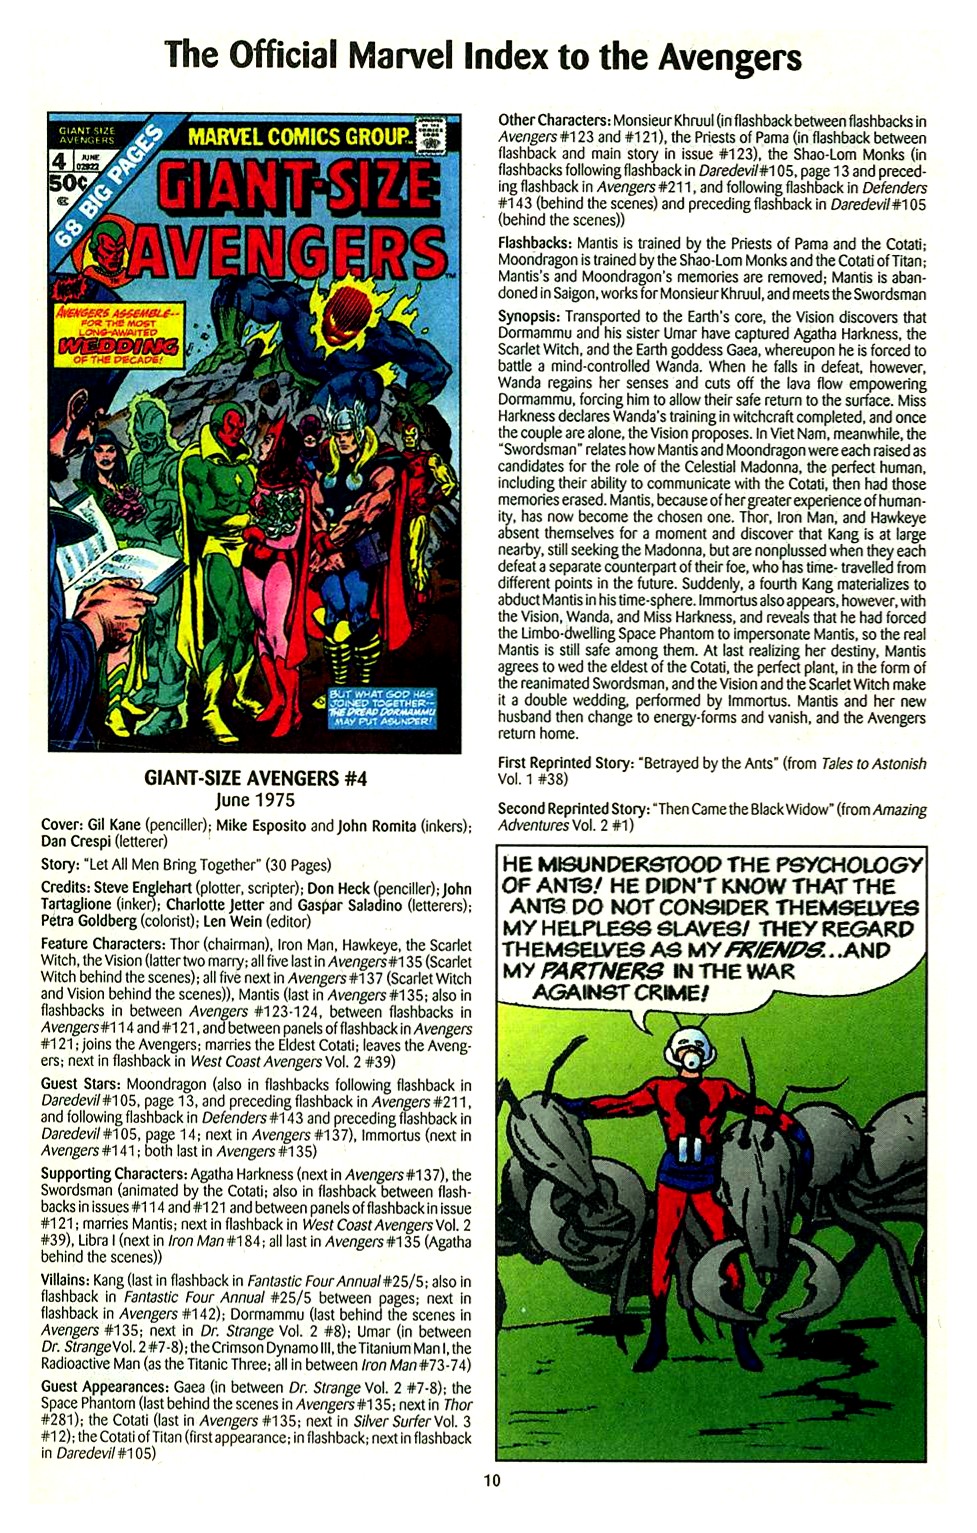 Read online The Official Marvel Index to the Avengers comic -  Issue #3 - 12